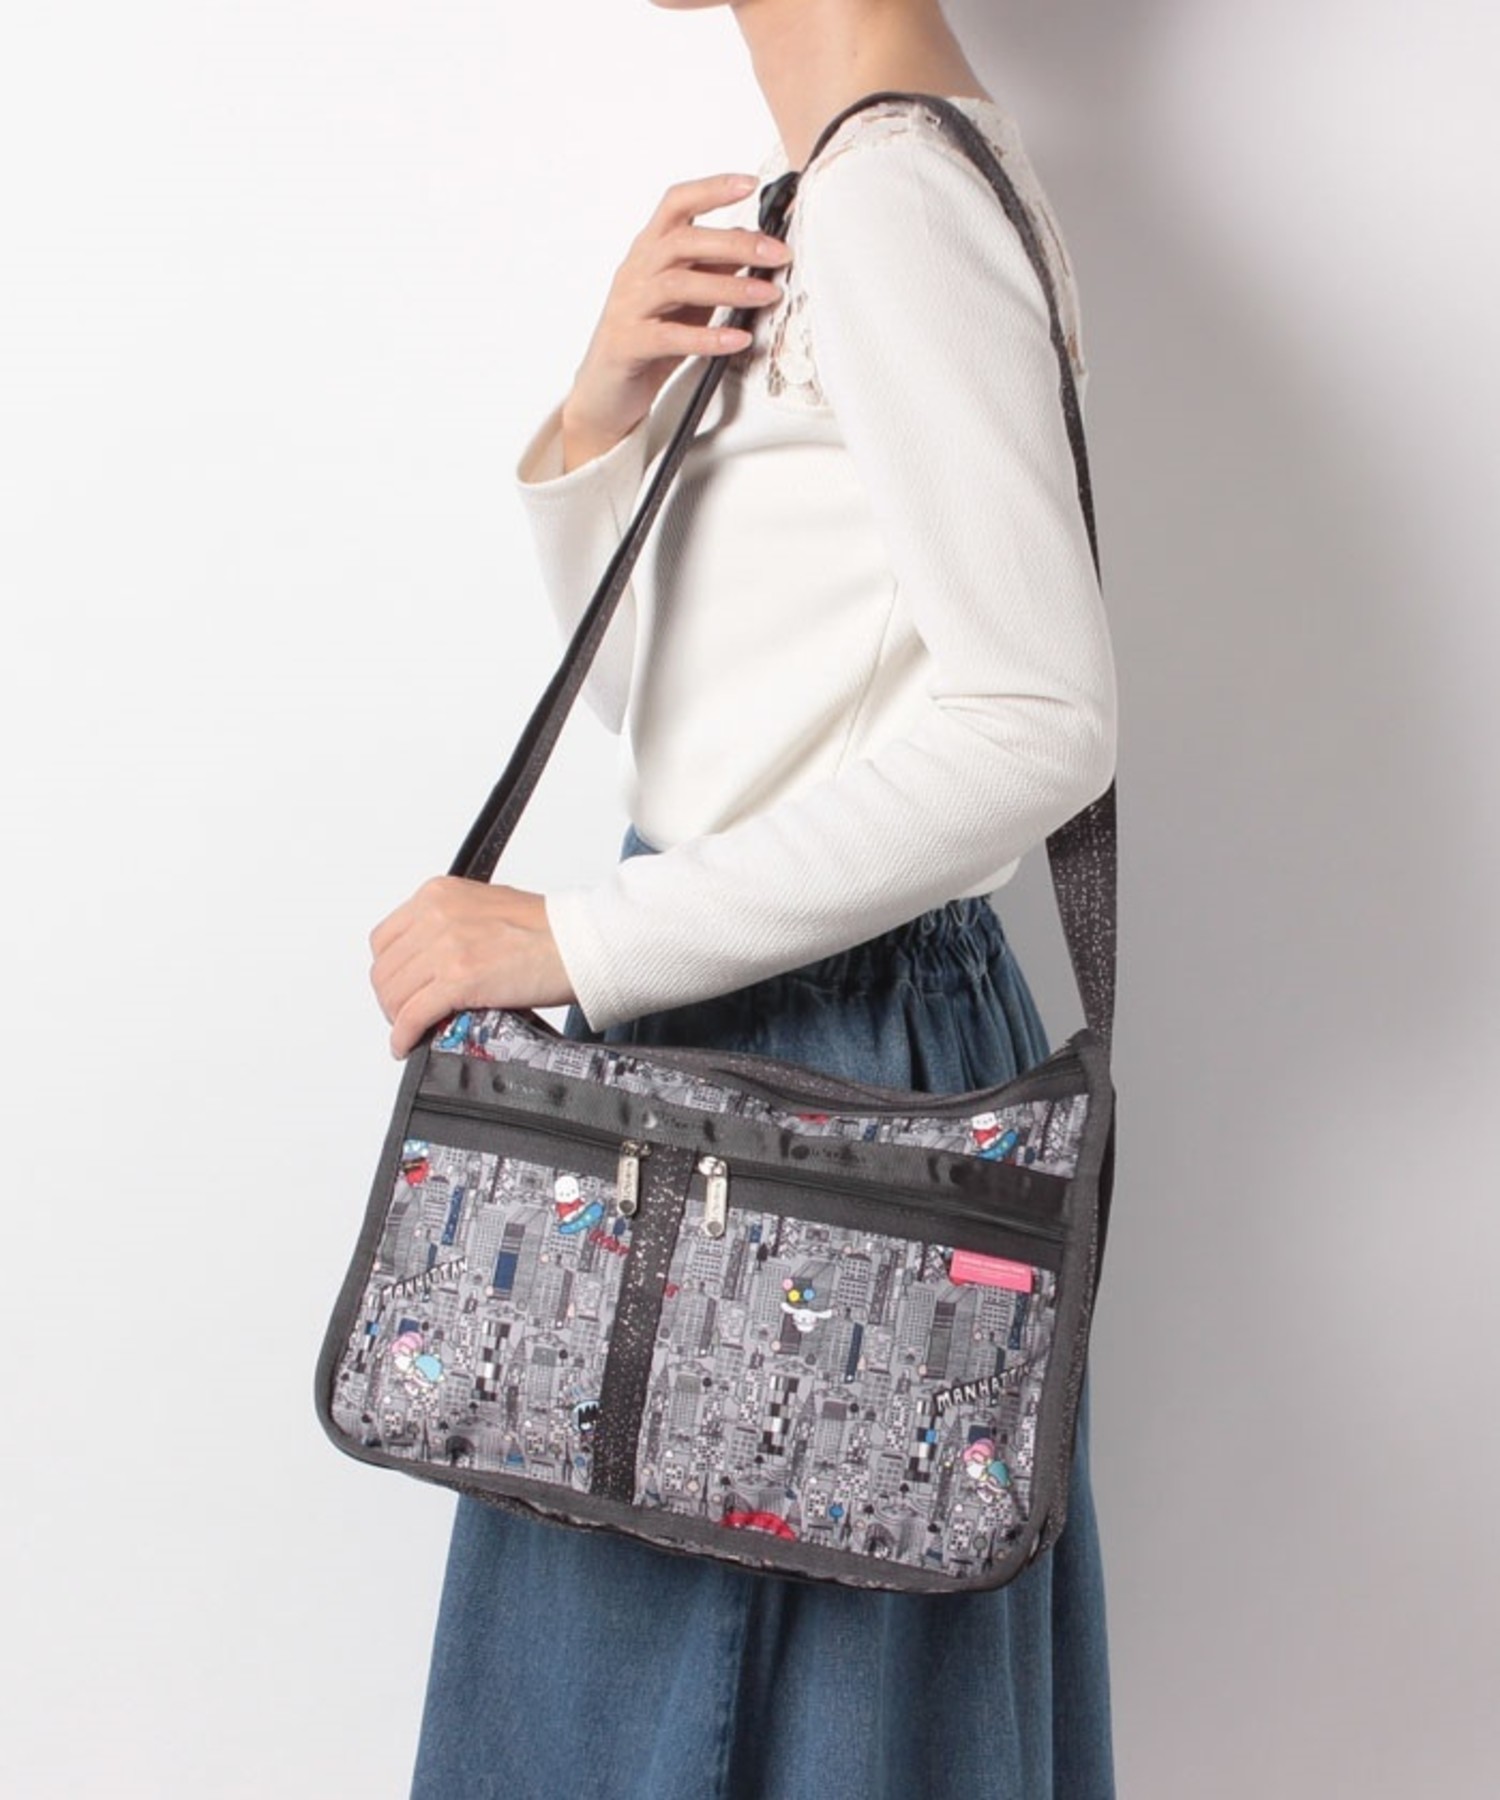 LeSportsac Deluxe Everyday Bag